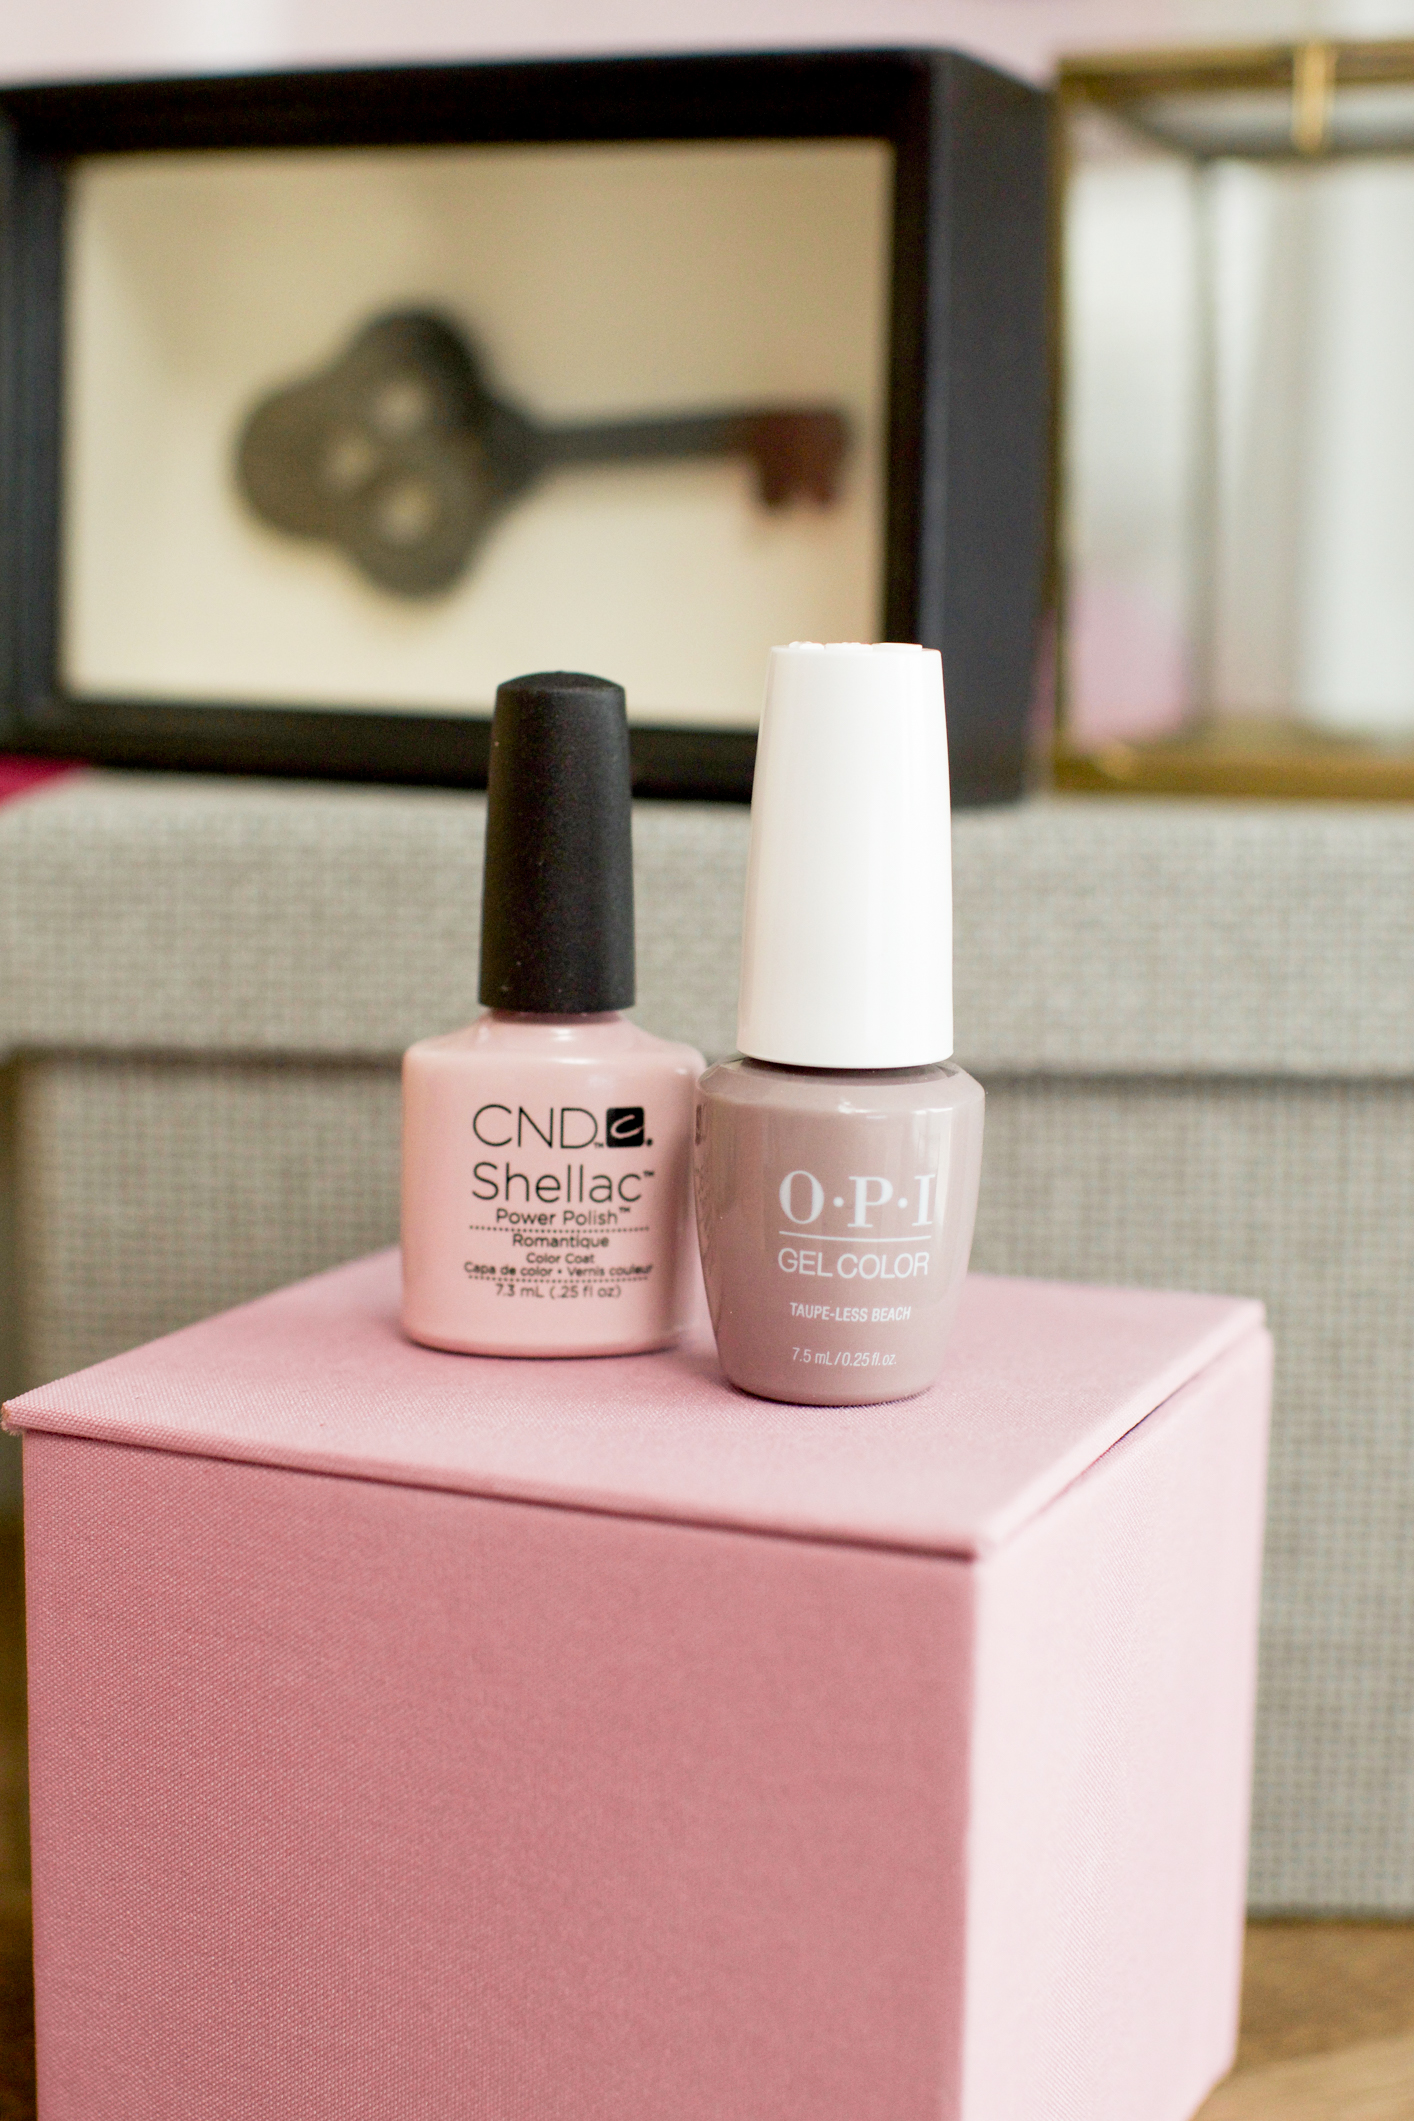 Steps for a Gel Manicure + My Favorite Products – The Small Things Blog